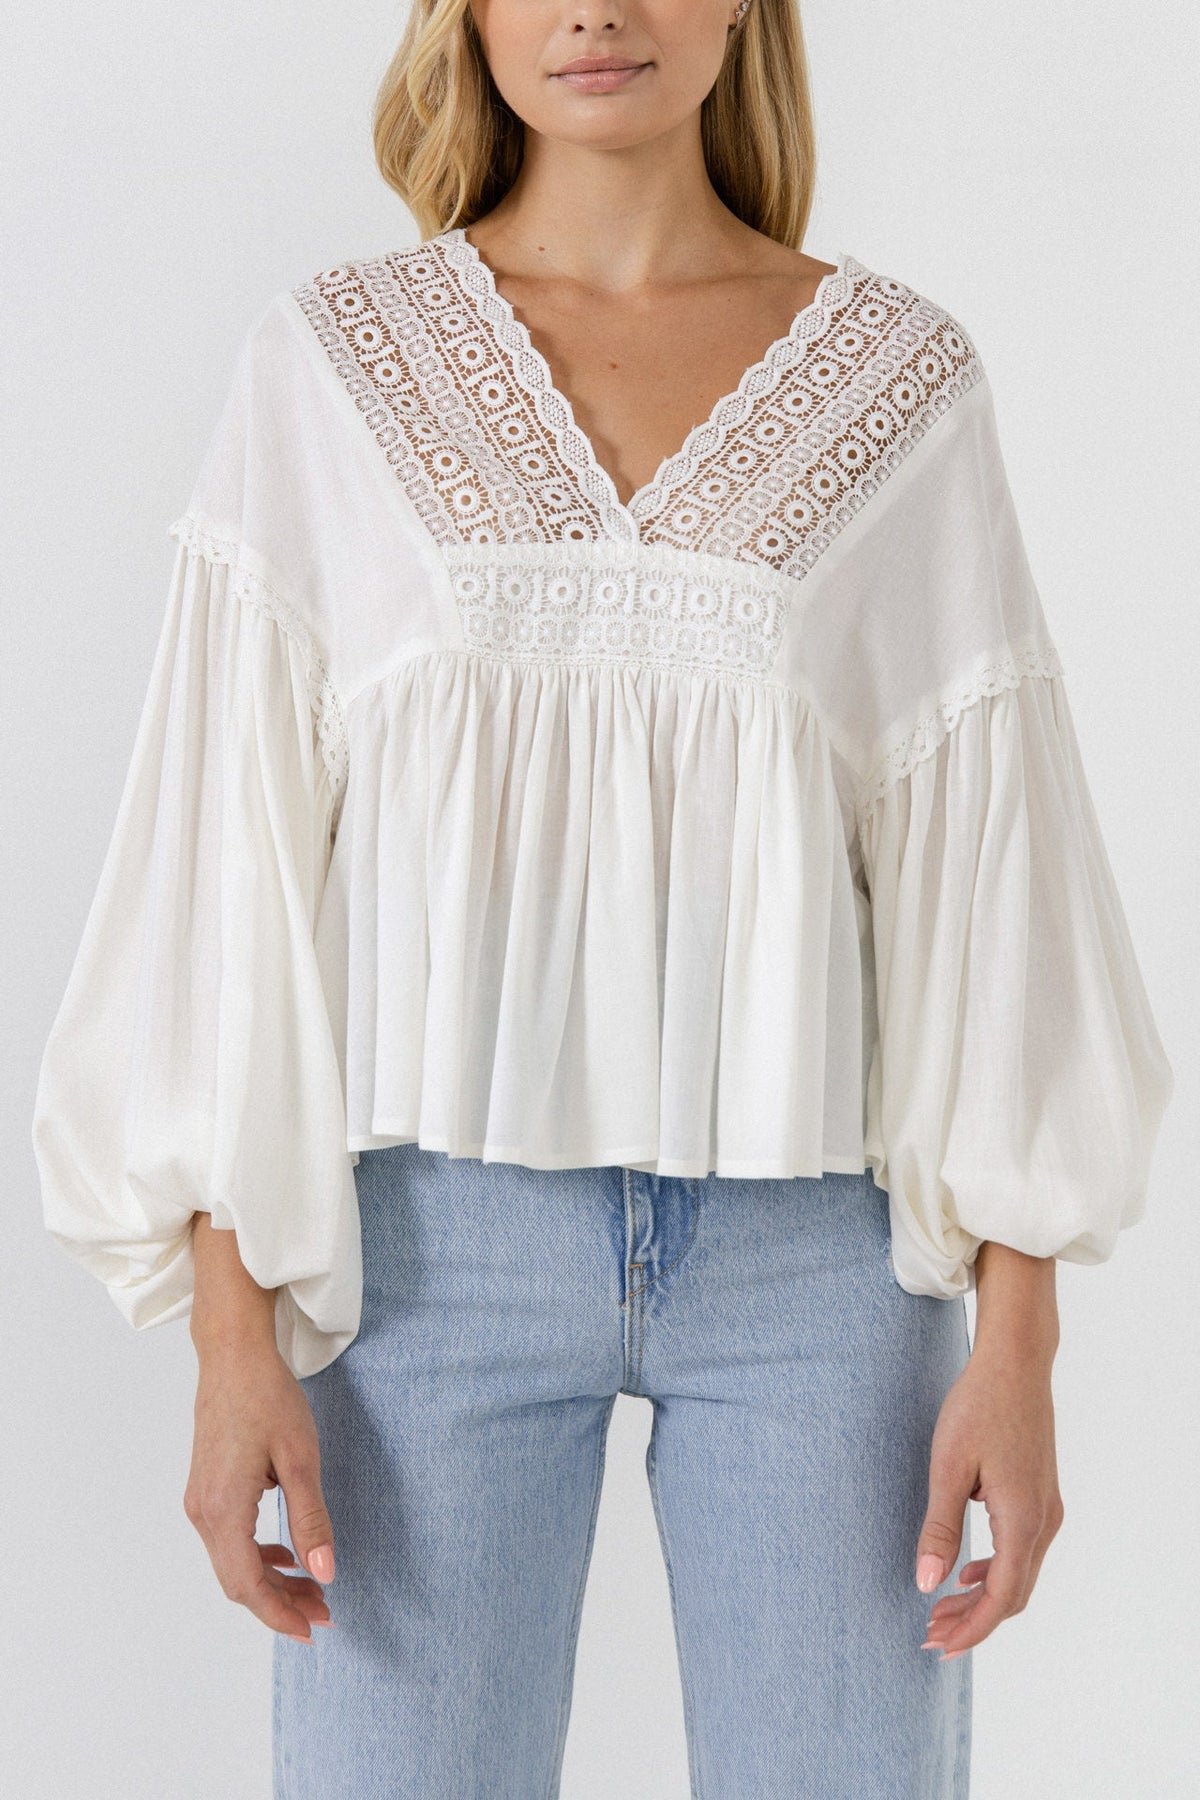 FREE THE ROSES - Lace Trim Deep V Top - TOPS available at Objectrare